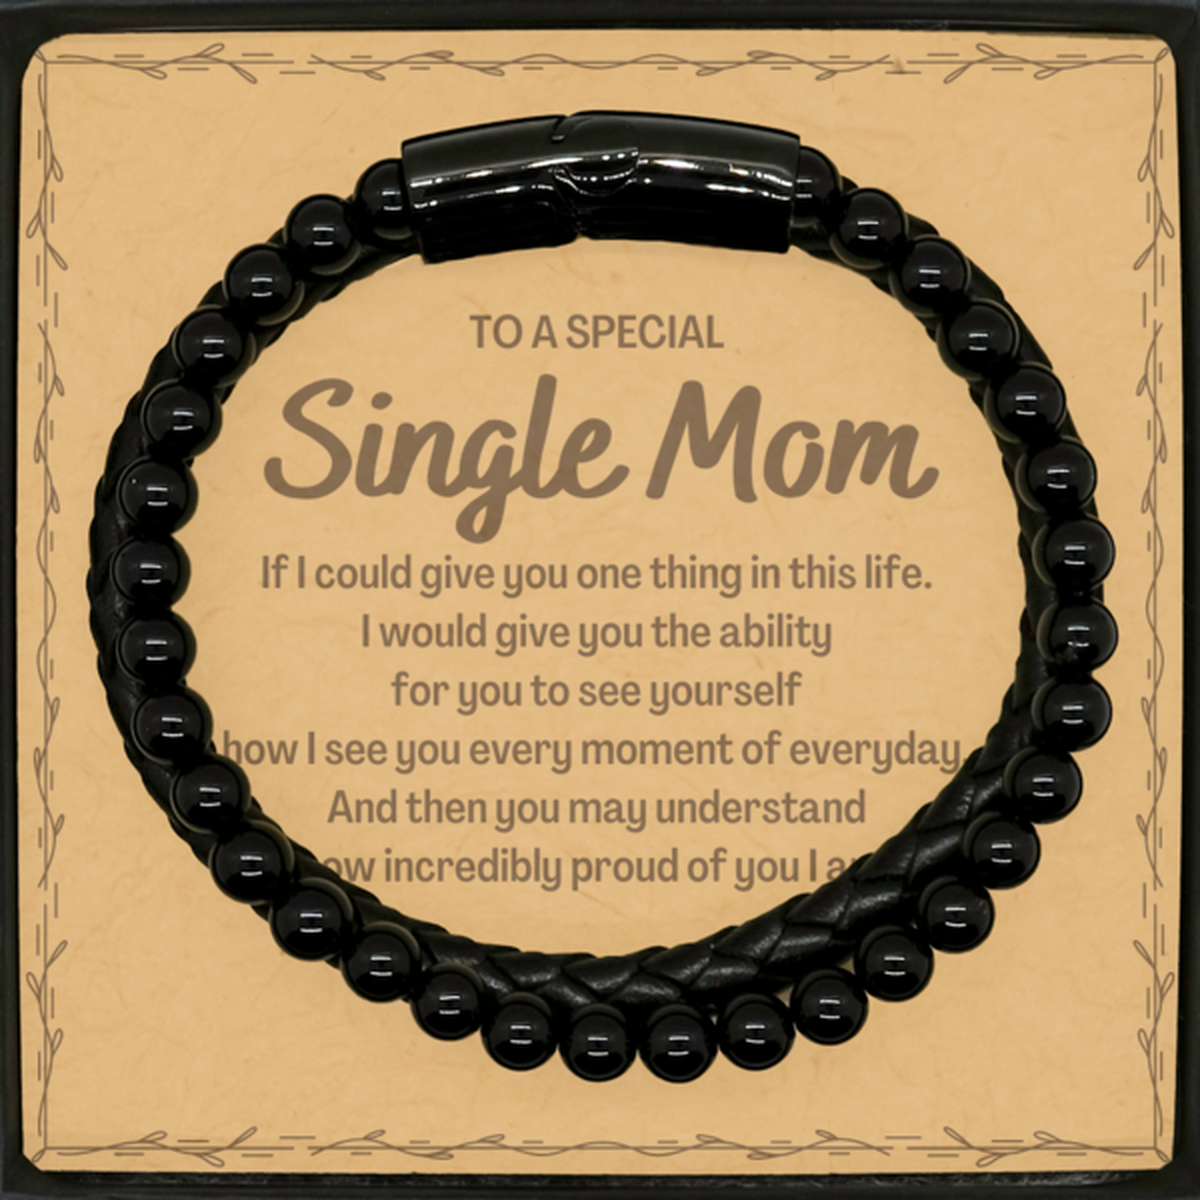 To My Single Mom Stone Leather Bracelets, Gifts For Single Mom Message Card, Inspirational Gifts for Christmas Birthday, Epic Gifts for Single Mom To A Special Single Mom how incredibly proud of you I am